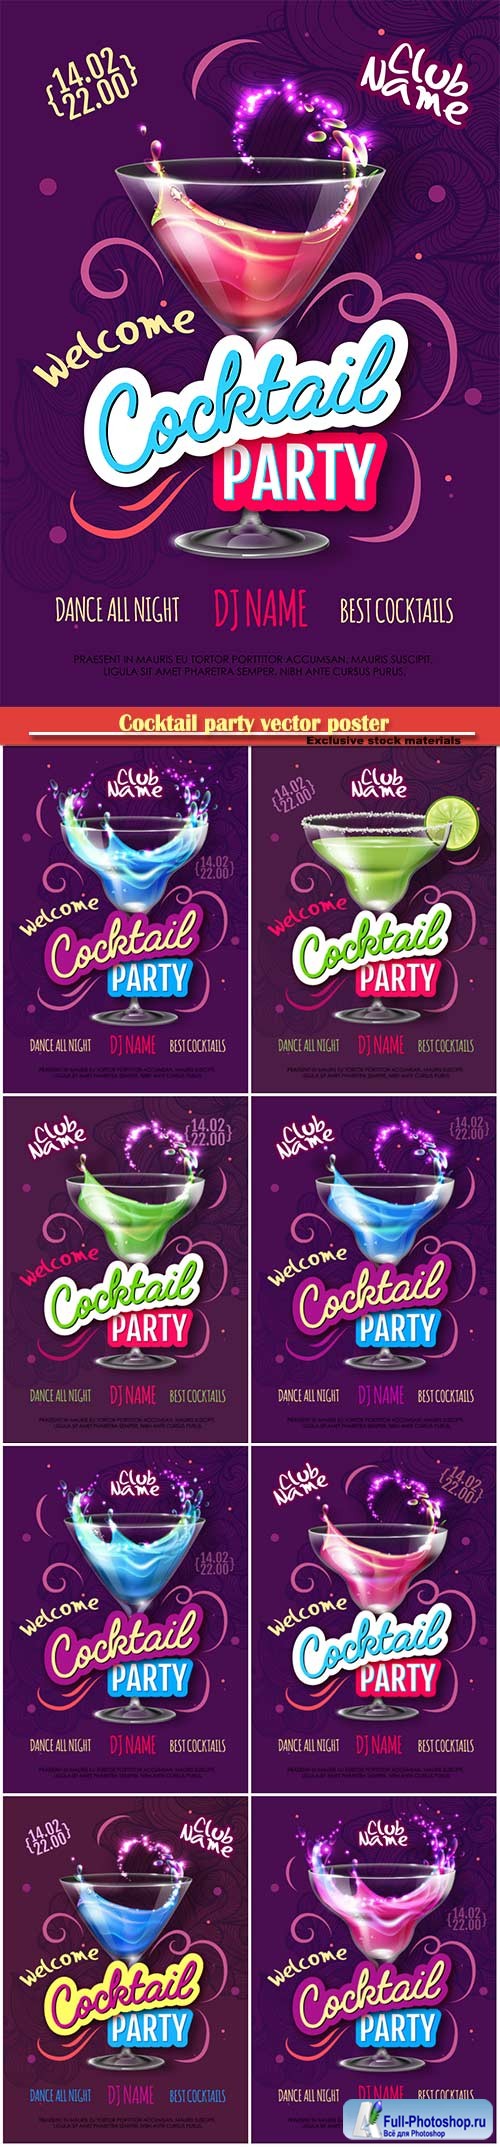 Cocktail party vector poster in eclectic modern style, Valentine's Day